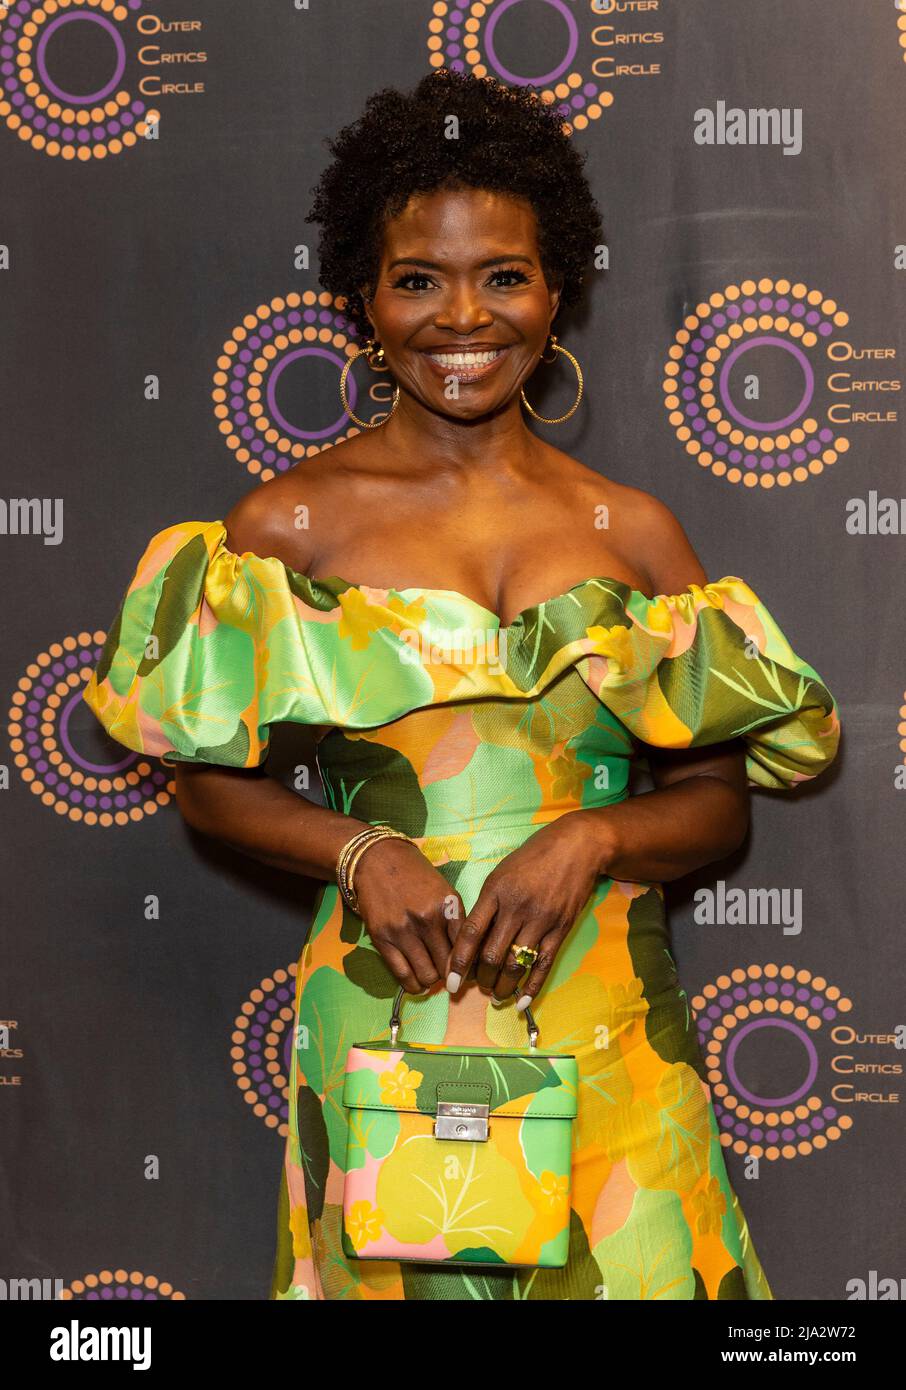 New York, USA. 26th May, 2022. LaChanze wearing dress and holding purse by Kate Spade attends 71st Annual Outer Critics Circle Awards at New York Public Library for the Performing Arts on May 26, 2022. (Photo by Lev Radin/Sipa USA) Credit: Sipa USA/Alamy Live News Stock Photo